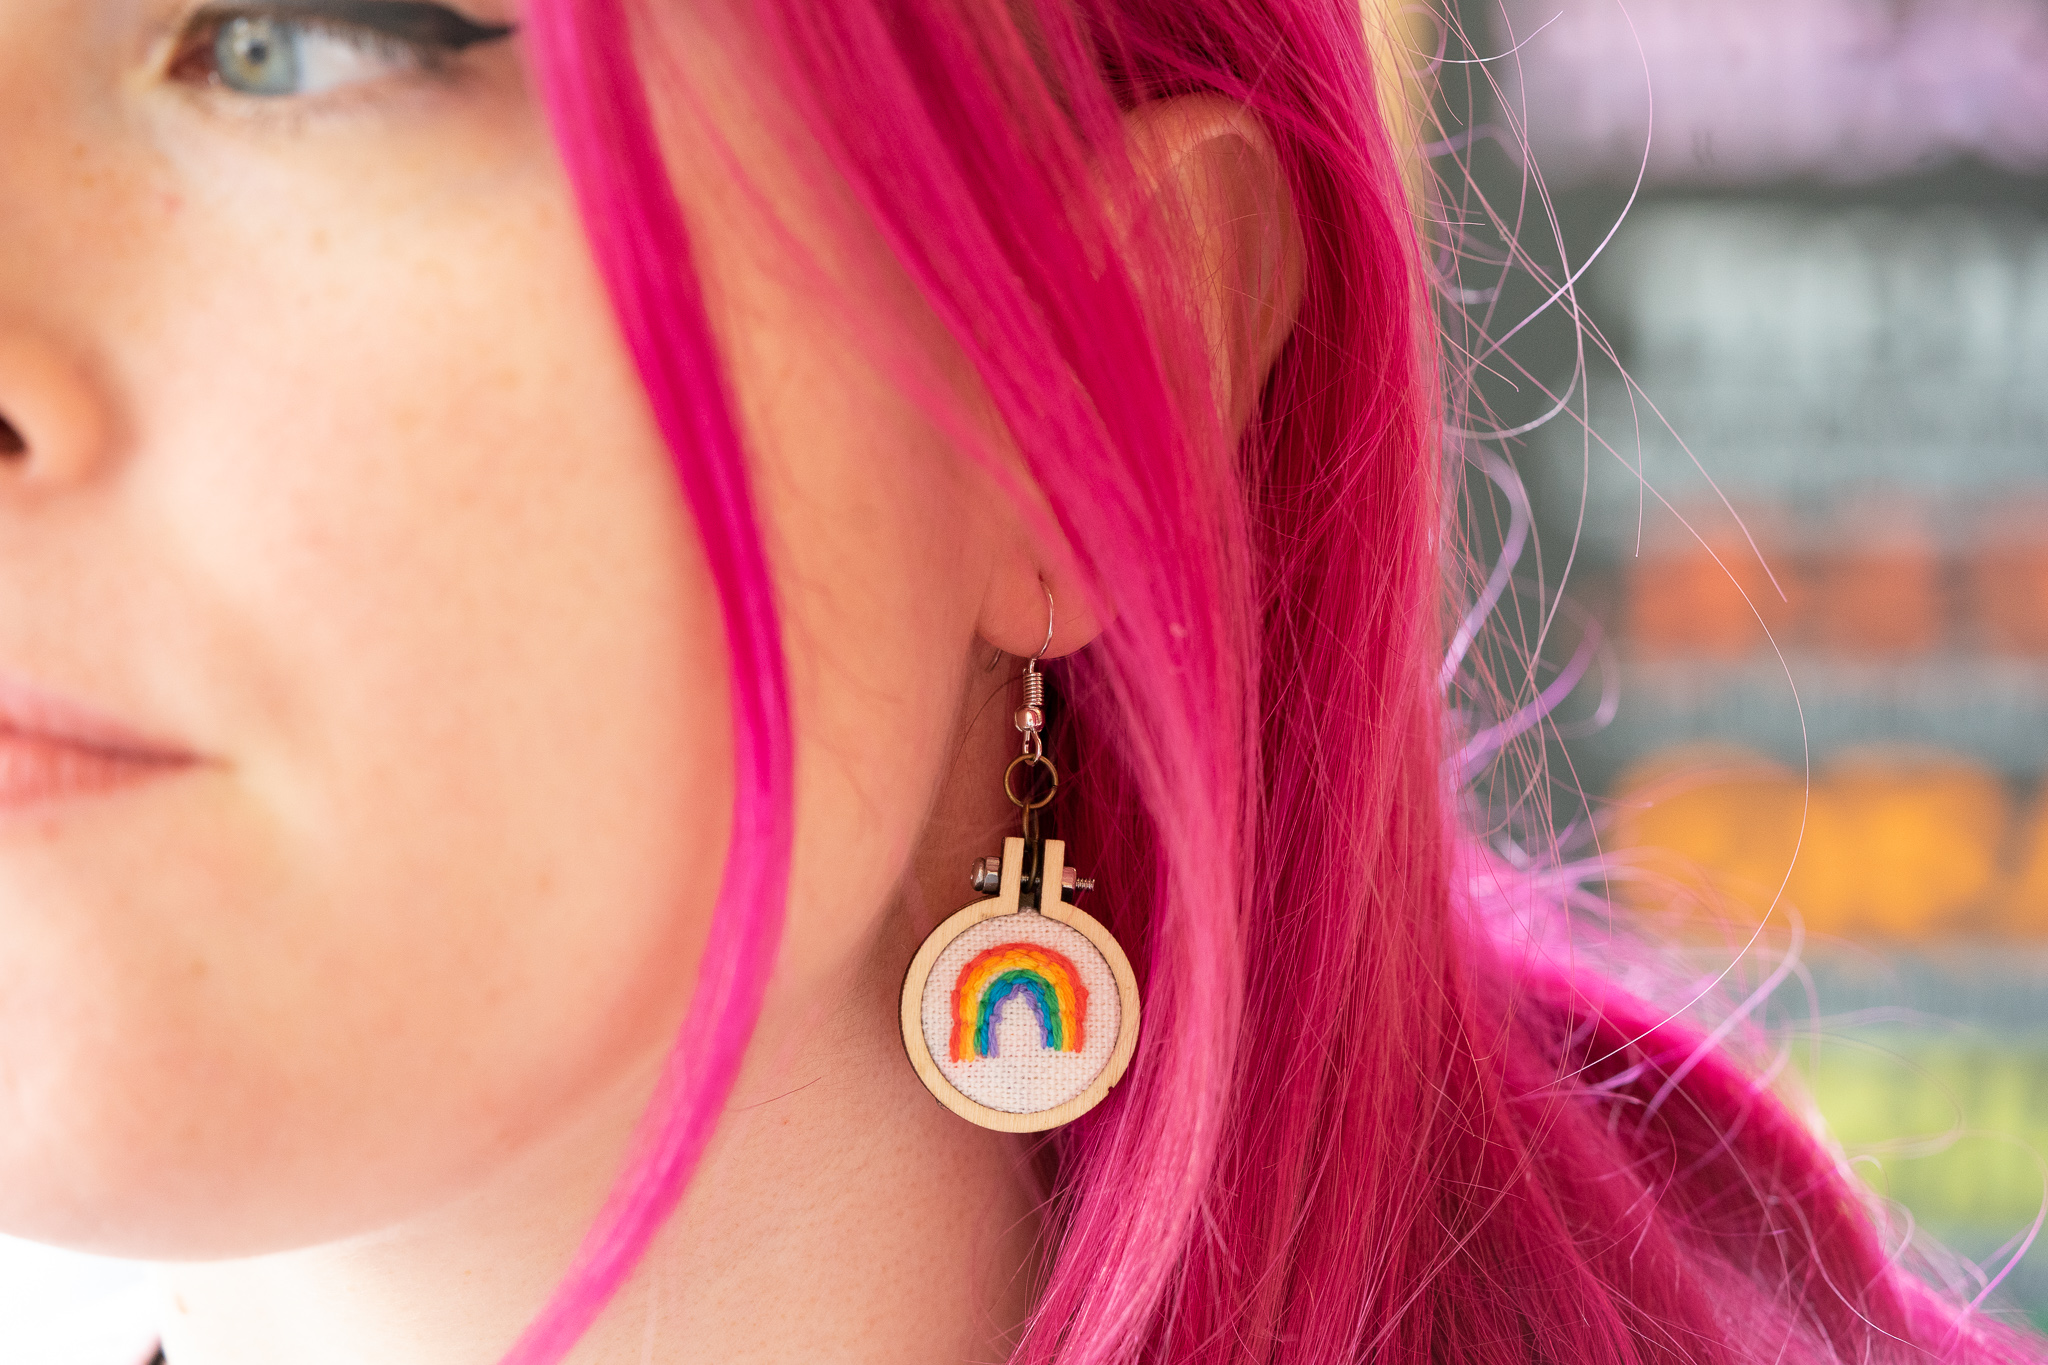 A rainbow embroidered on a 1 inch circle of white fabric is attached to a circular earring, dangling from a girl with pink hair's ear.